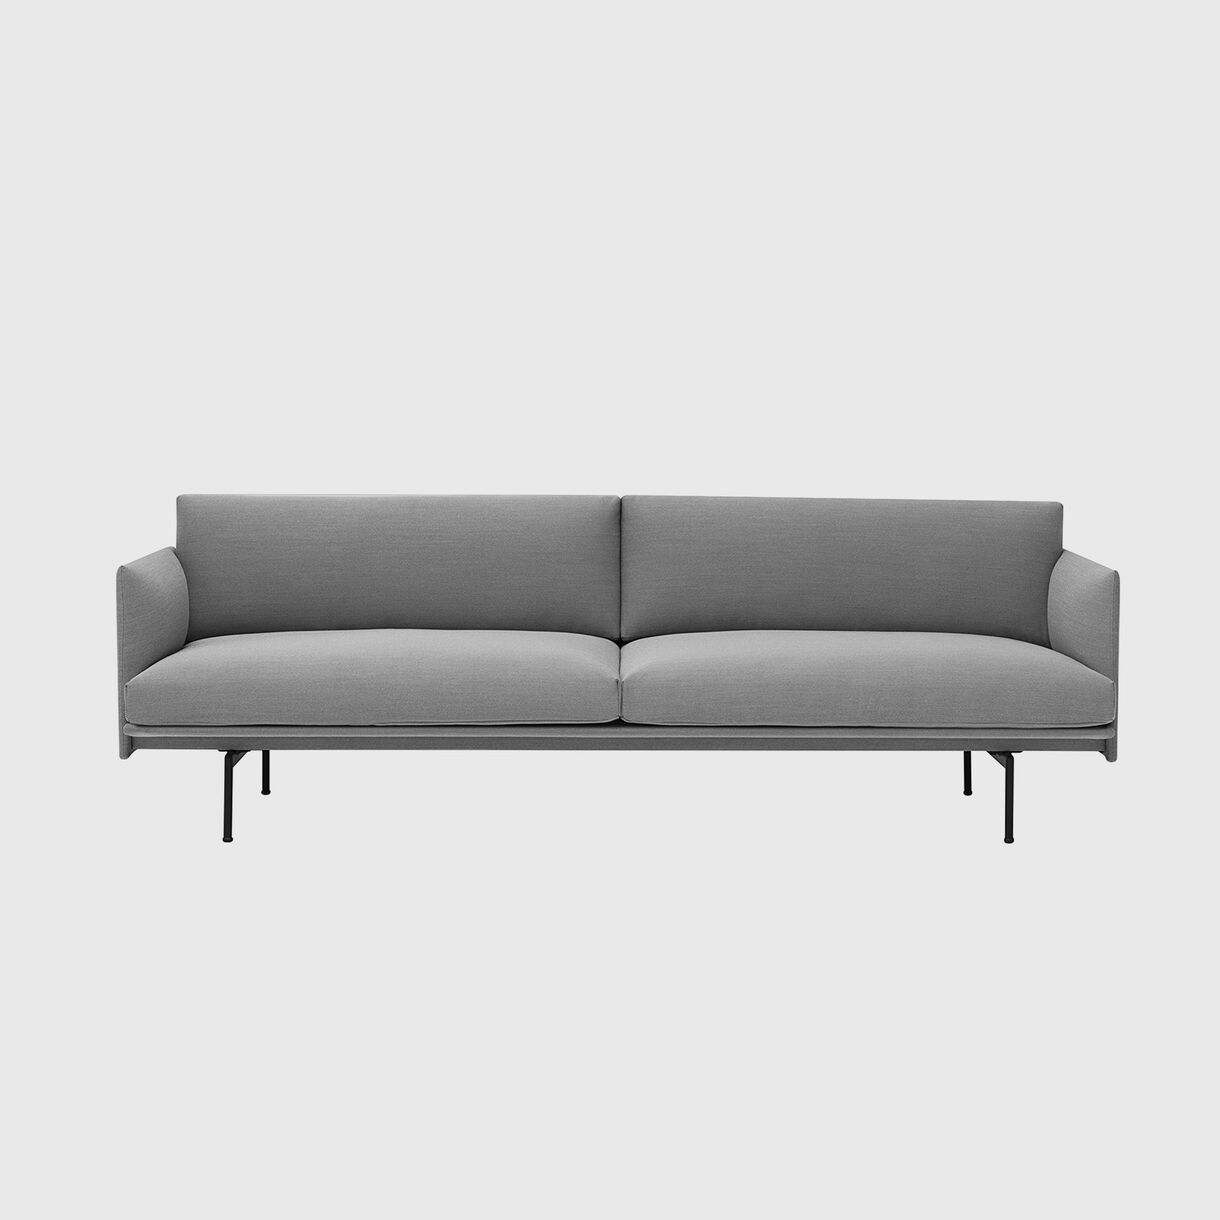 Outline 3 Seater Sofa, Vancouver 14